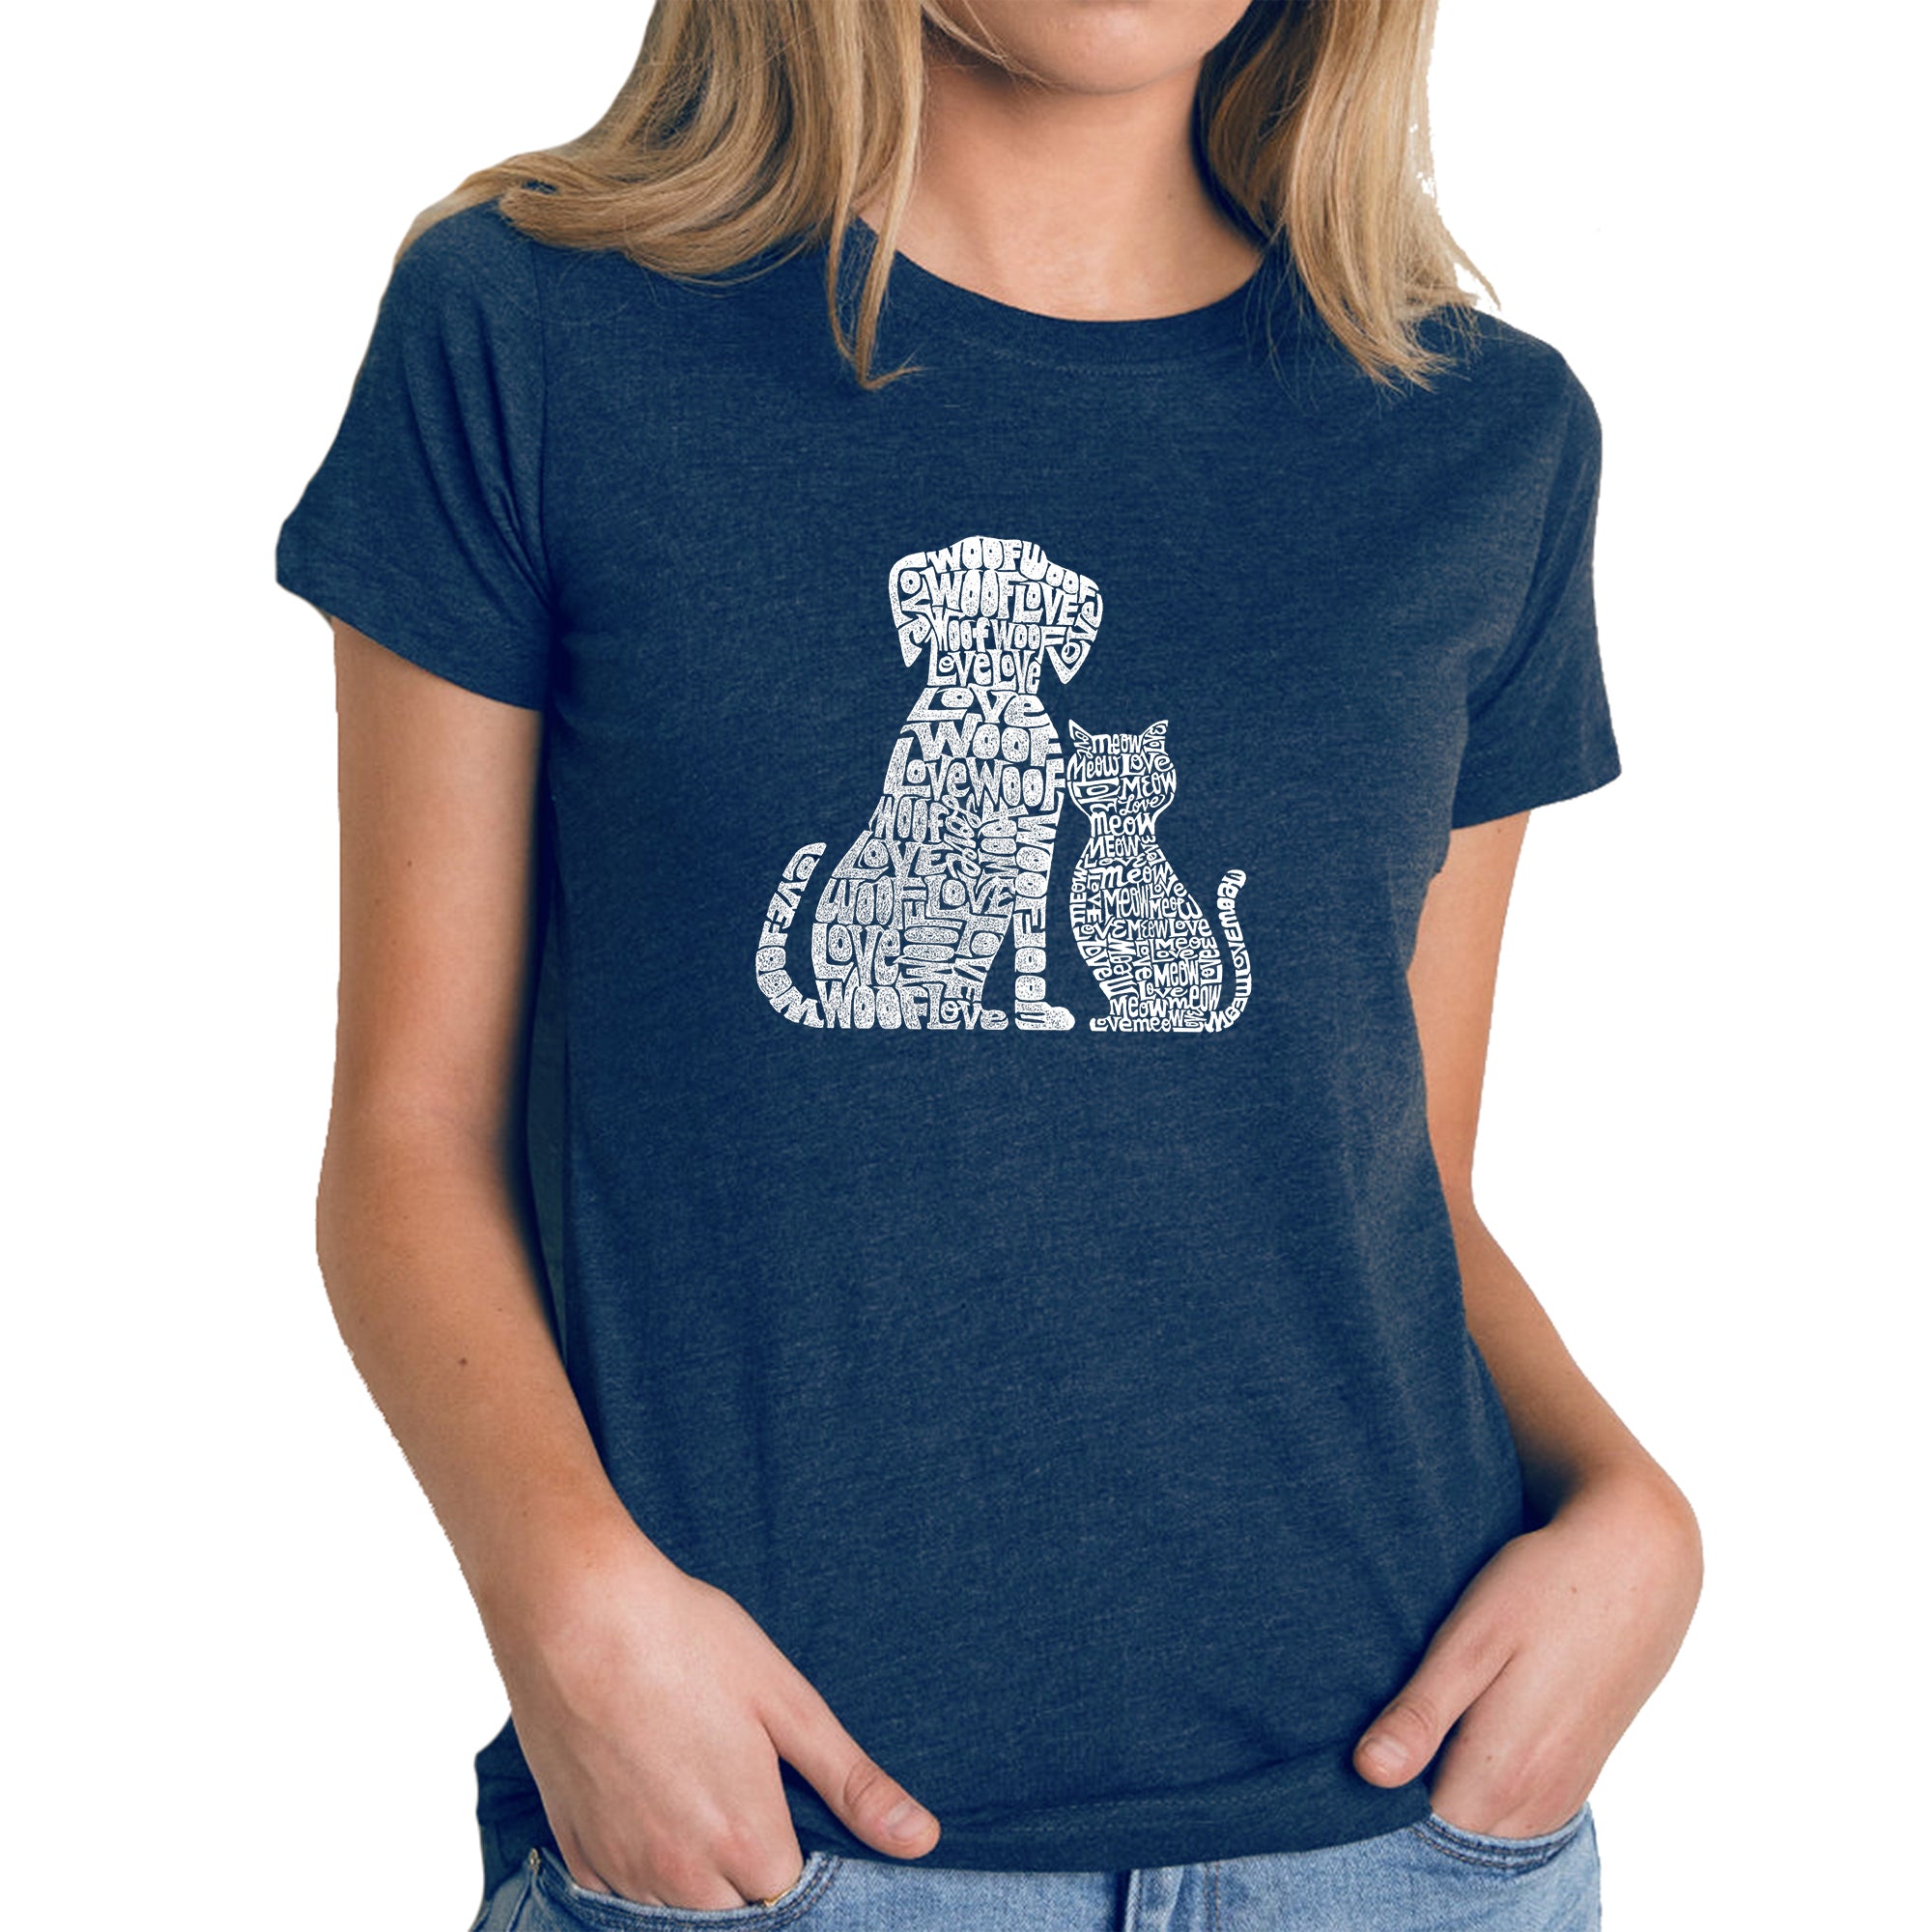 Dogs And Cats - Women's Premium Blend Word Art T-Shirt - Navy - Large